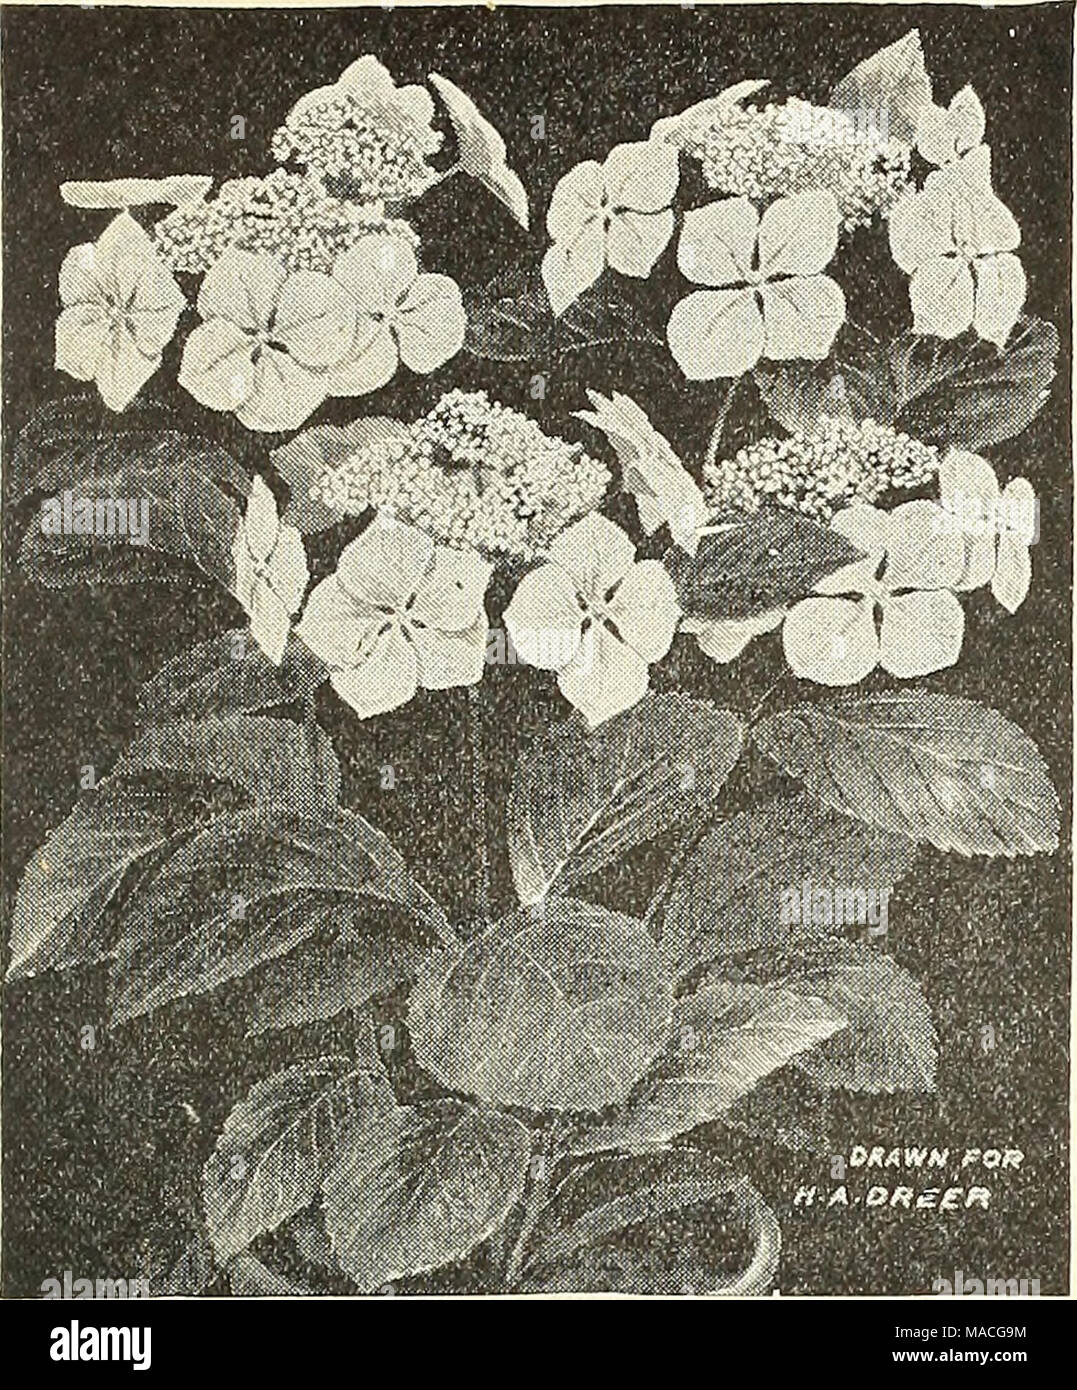 . Dreer's wholesale price list summer edition 1902 July to August : seasonable flower and vegetable seeds, fertilizers, tools, etc., etc . HYDRANGEA HORTENSIS MARIESII. Genista Fragrans. A nice lot of 4-in. pot plants, $2.00 per doz.; $15.00 per 100. Hydrangea Hortensis Mariesii. One of the most distinct and effective varieties yet introduced. It is especially remarkable for the large size and distinct color of its sterile flowers, which are fully 3 inches across ; of a light pink color tinted with mauve. A variety that we have every reason to believe will become popular as a forcing plant whe Stock Photo